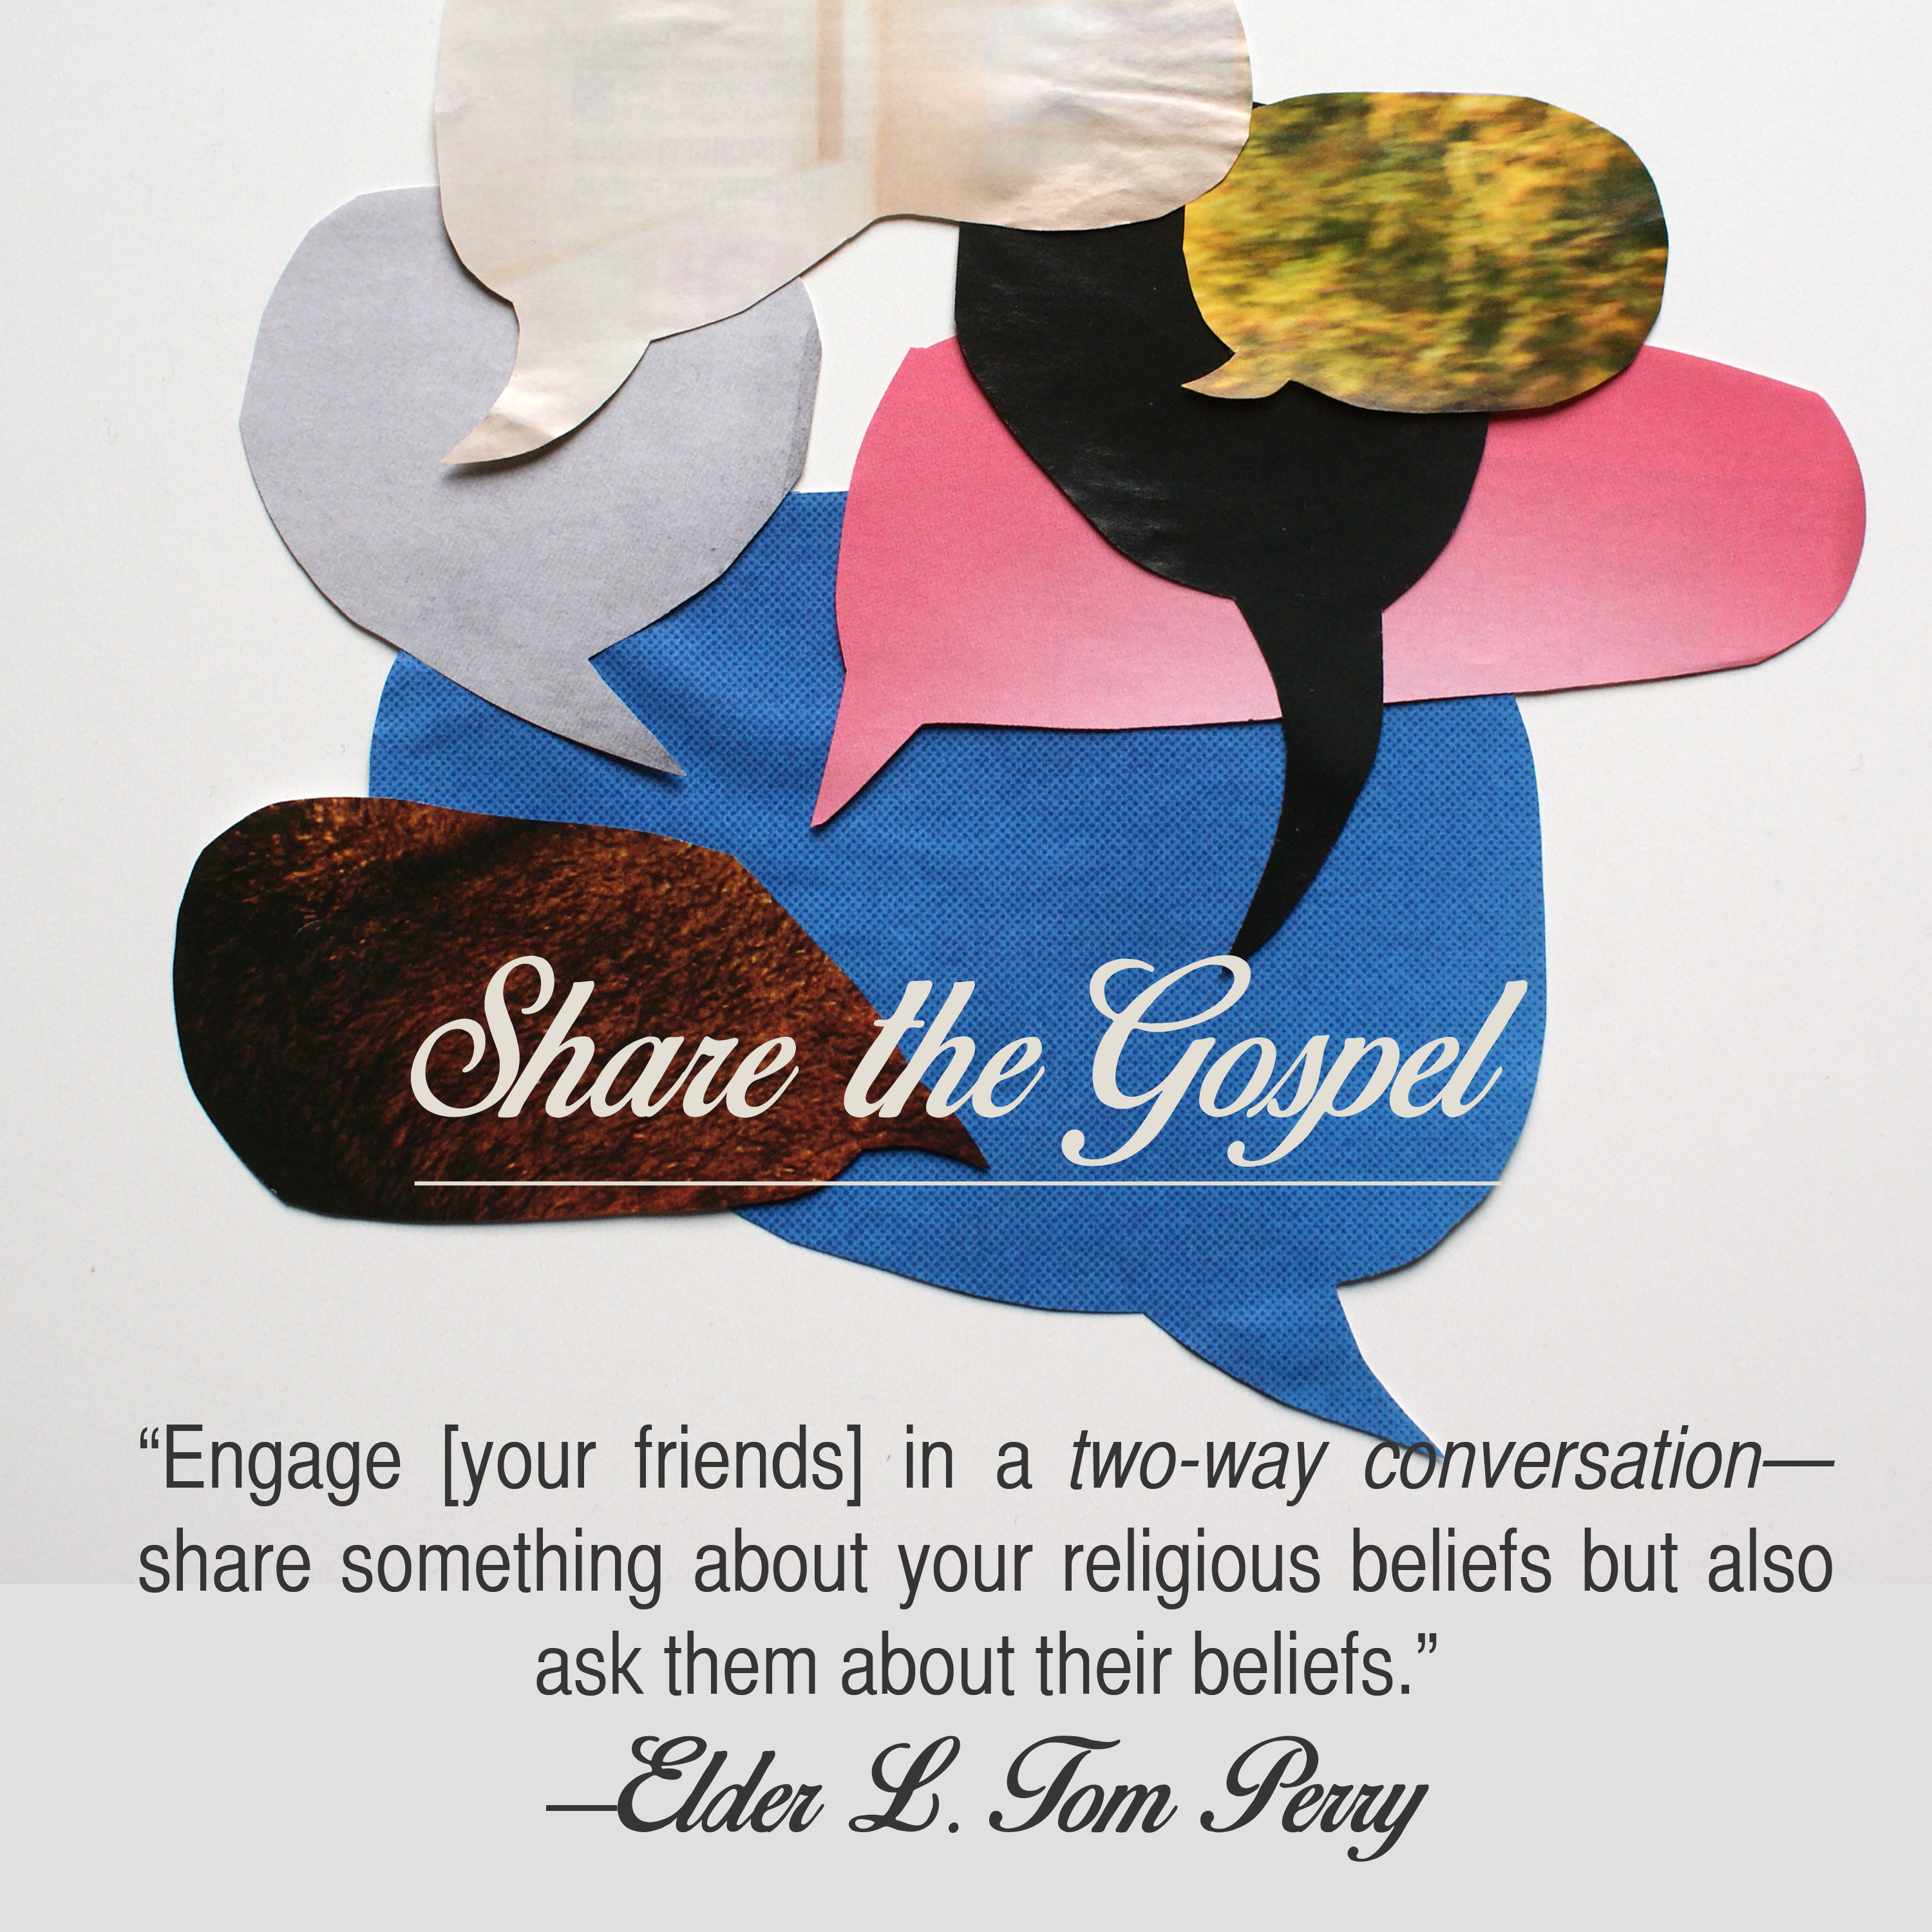 Share the Gospel: "Engage [your friends[ in a two-way conversation—share something about your religious beliefs but also ask them about their beliefs." —Elder L. Tom Perry